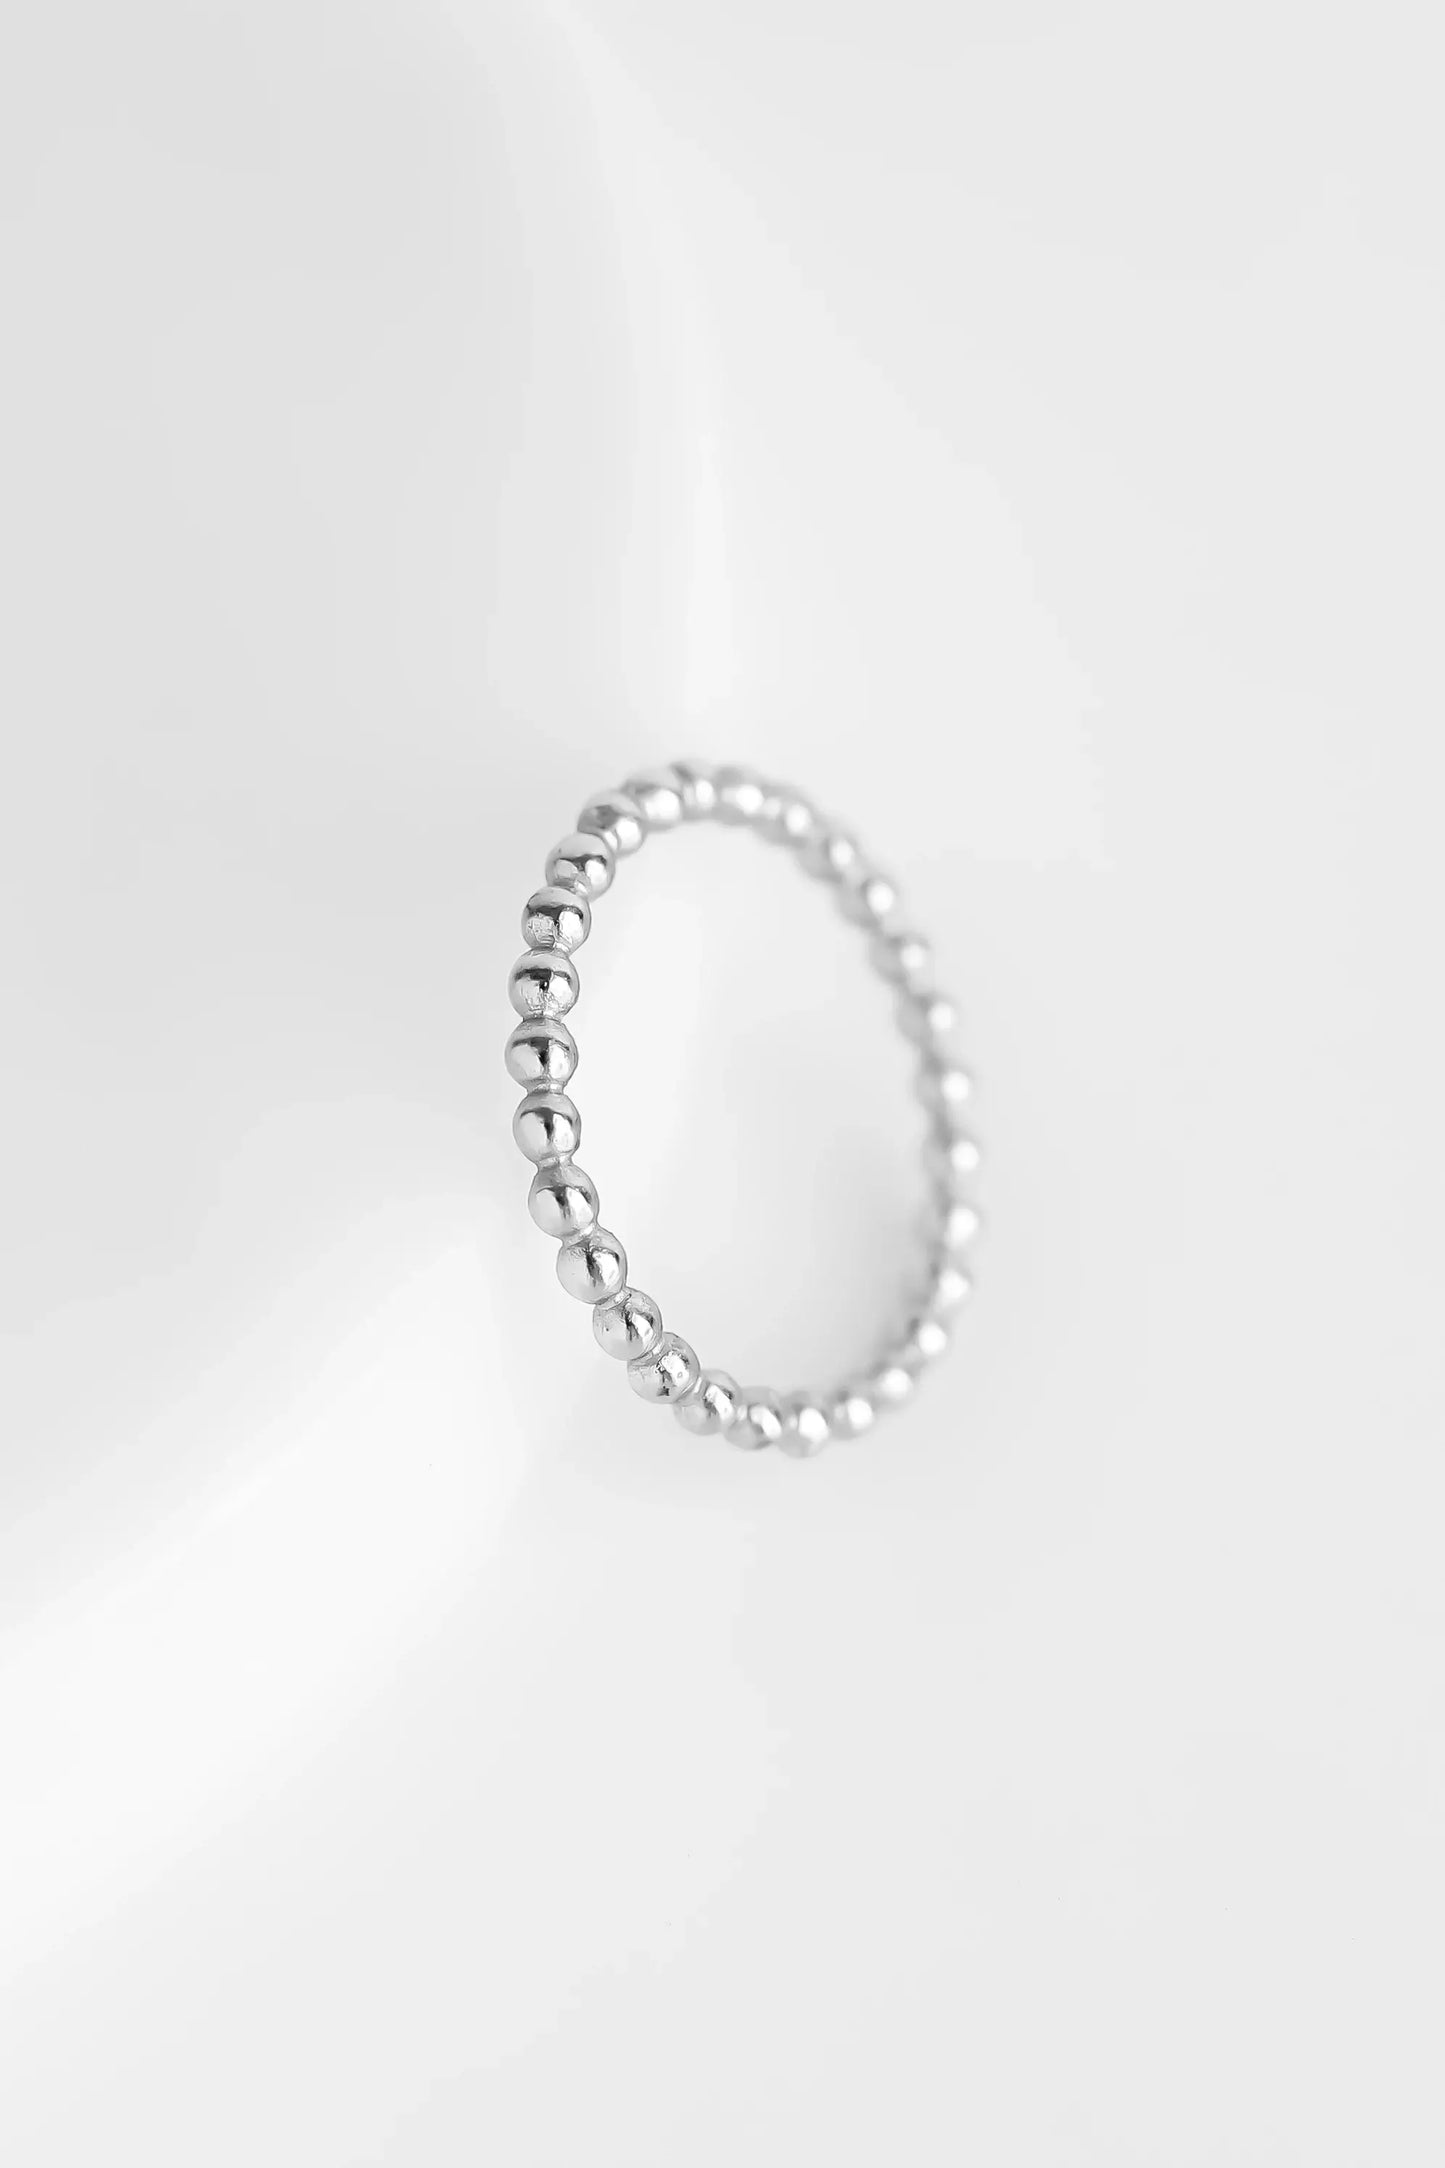 The    Andie Ring by  Francesca Jewellery from the Rings Collection.